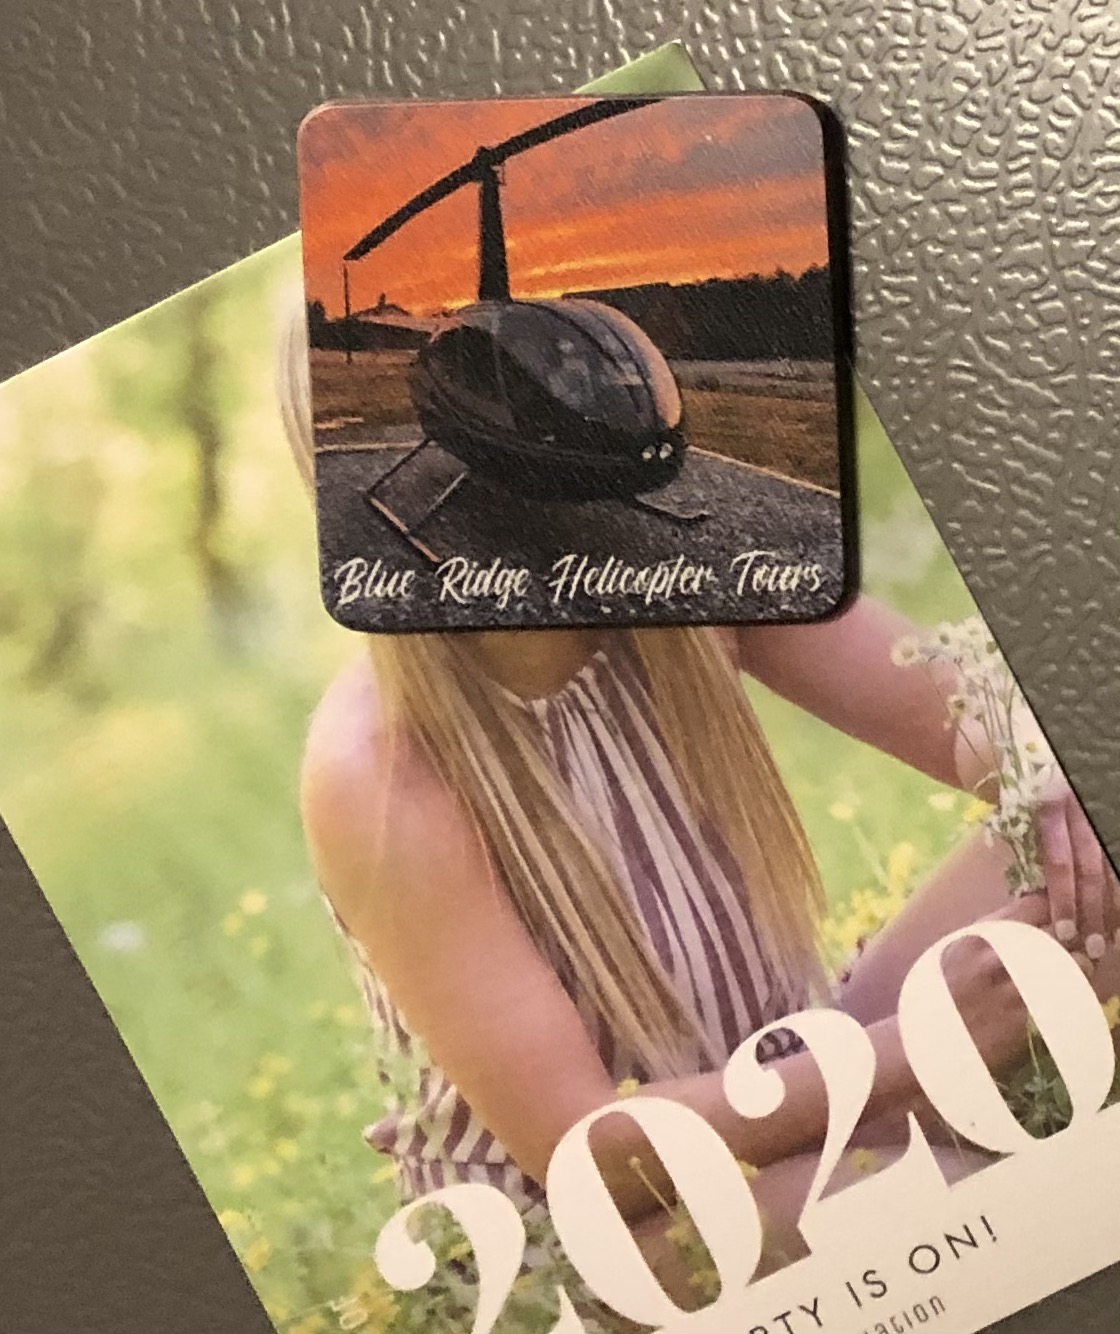 Magnet created for a new helicopter tour business. They plan to put these in their gift shop.  